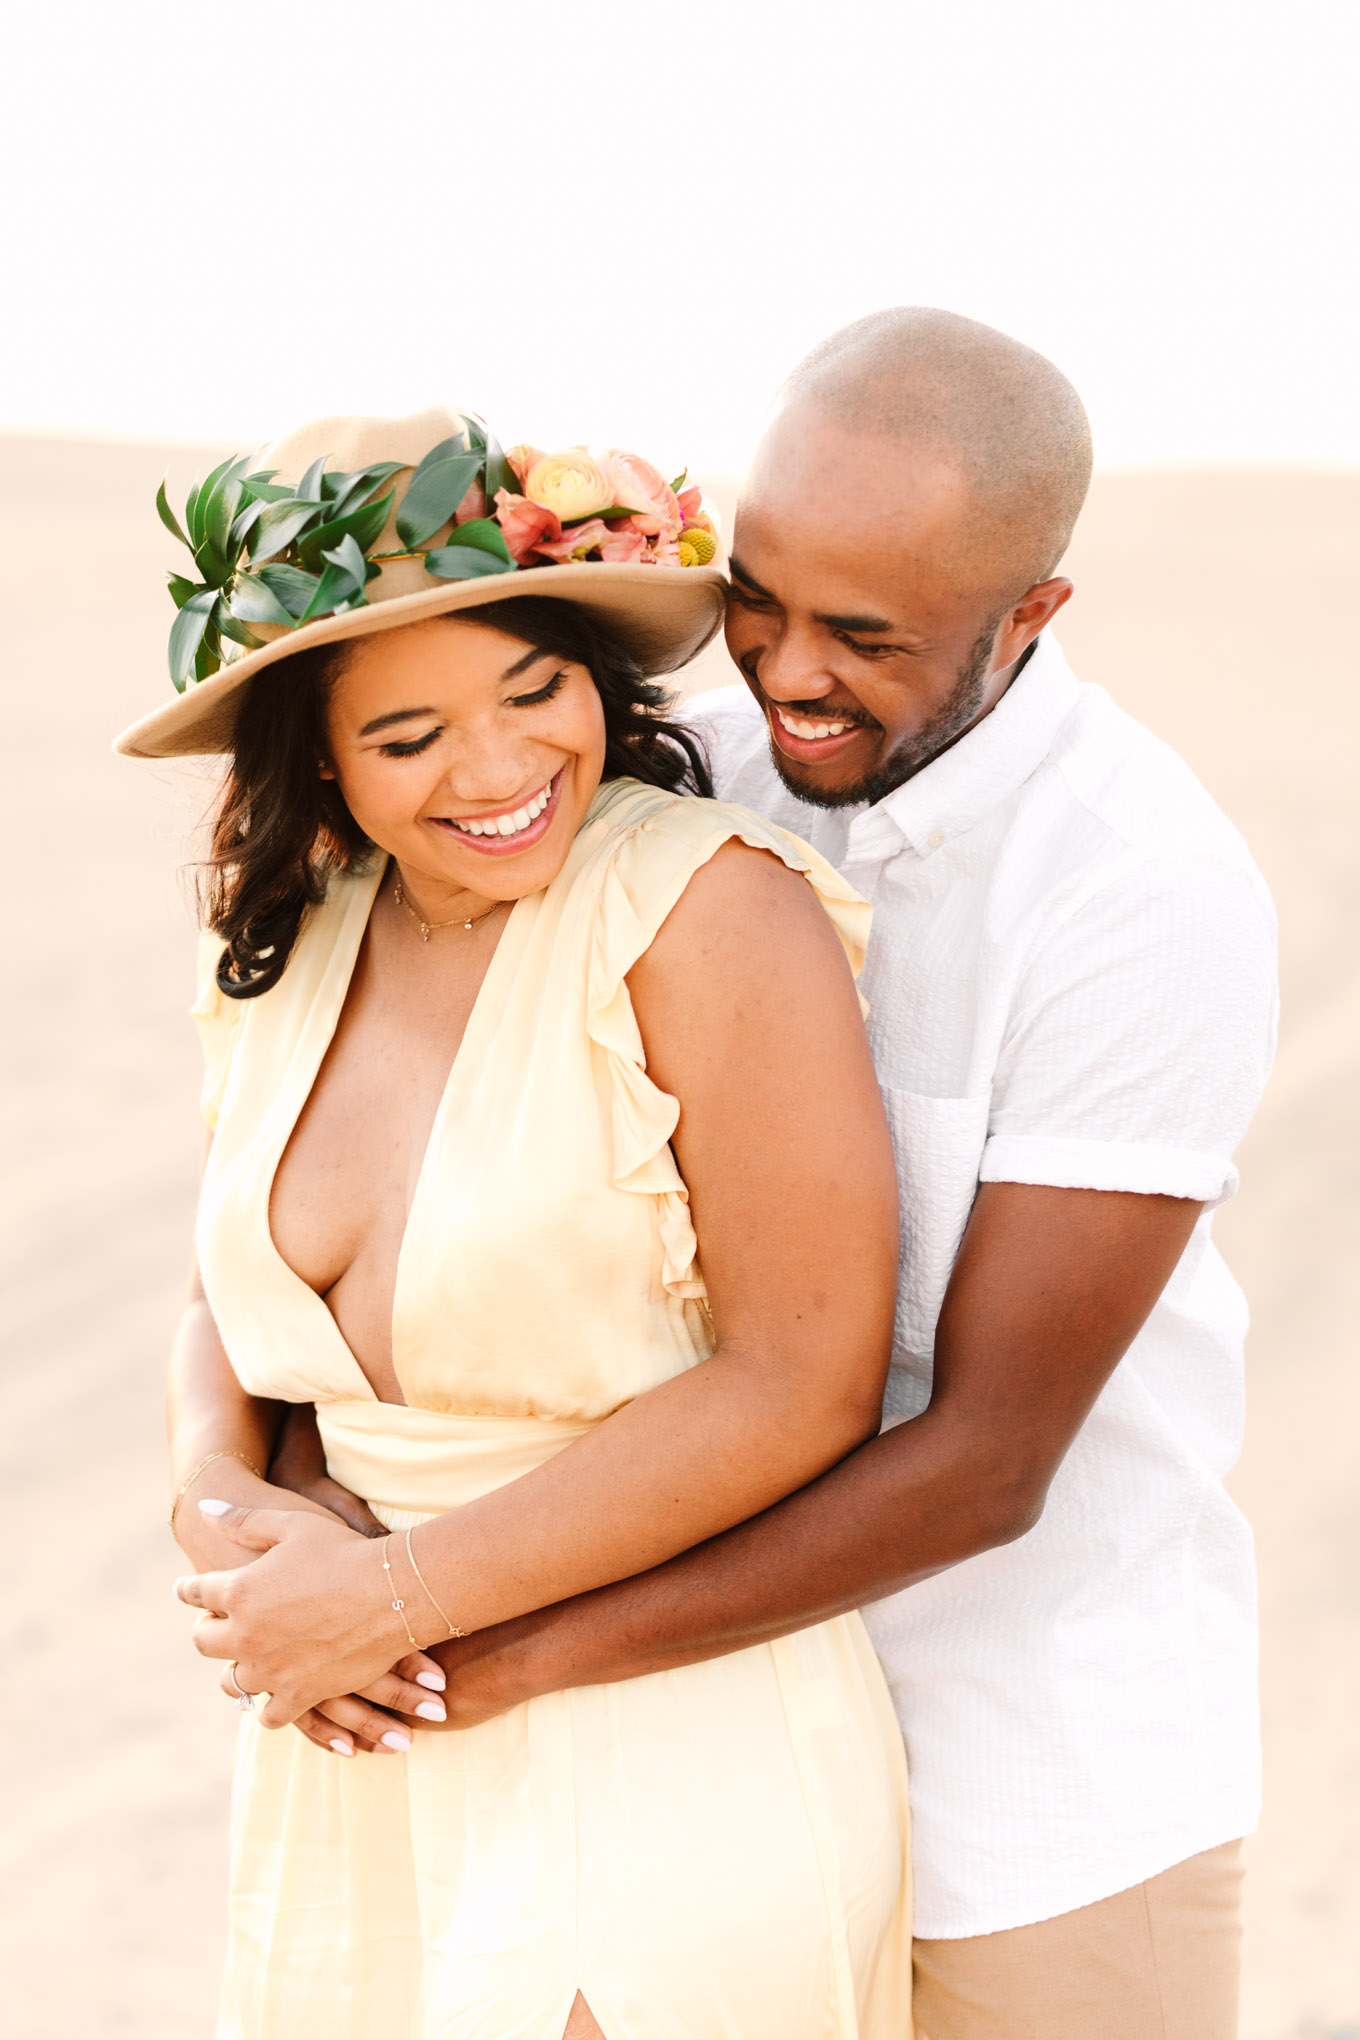 Engaged couple portrait on a sand dune | California Sand Dunes engagement session | Colorful Palm Springs wedding photography | #palmspringsphotographer #sanddunes #engagementsession #southerncalifornia  Source: Mary Costa Photography | Los Angeles